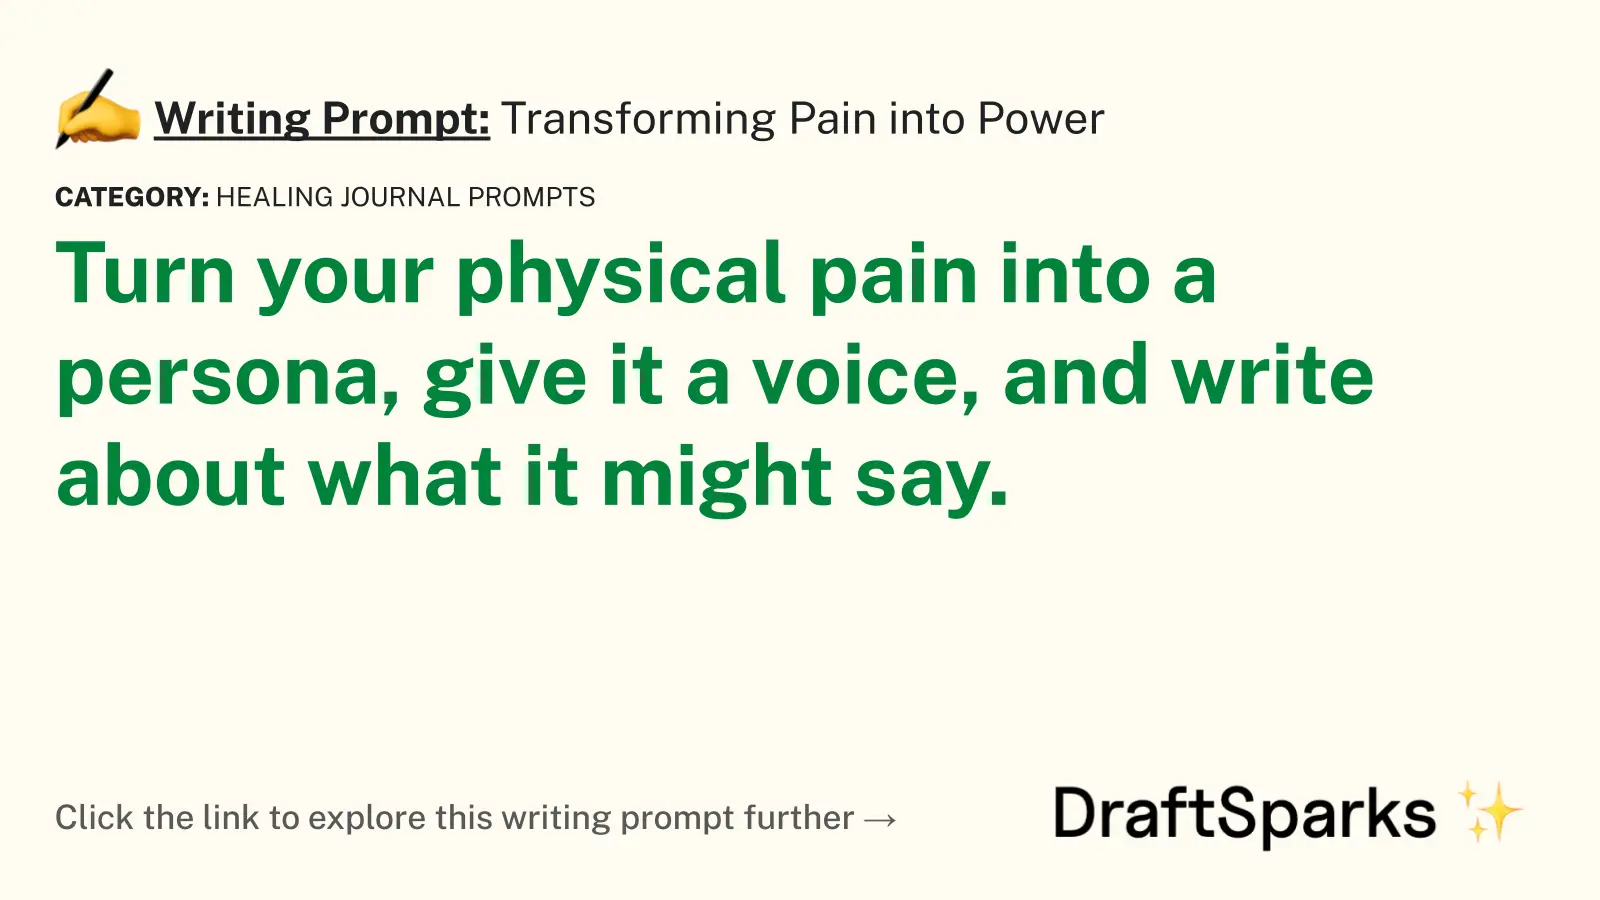 Transforming Pain into Power